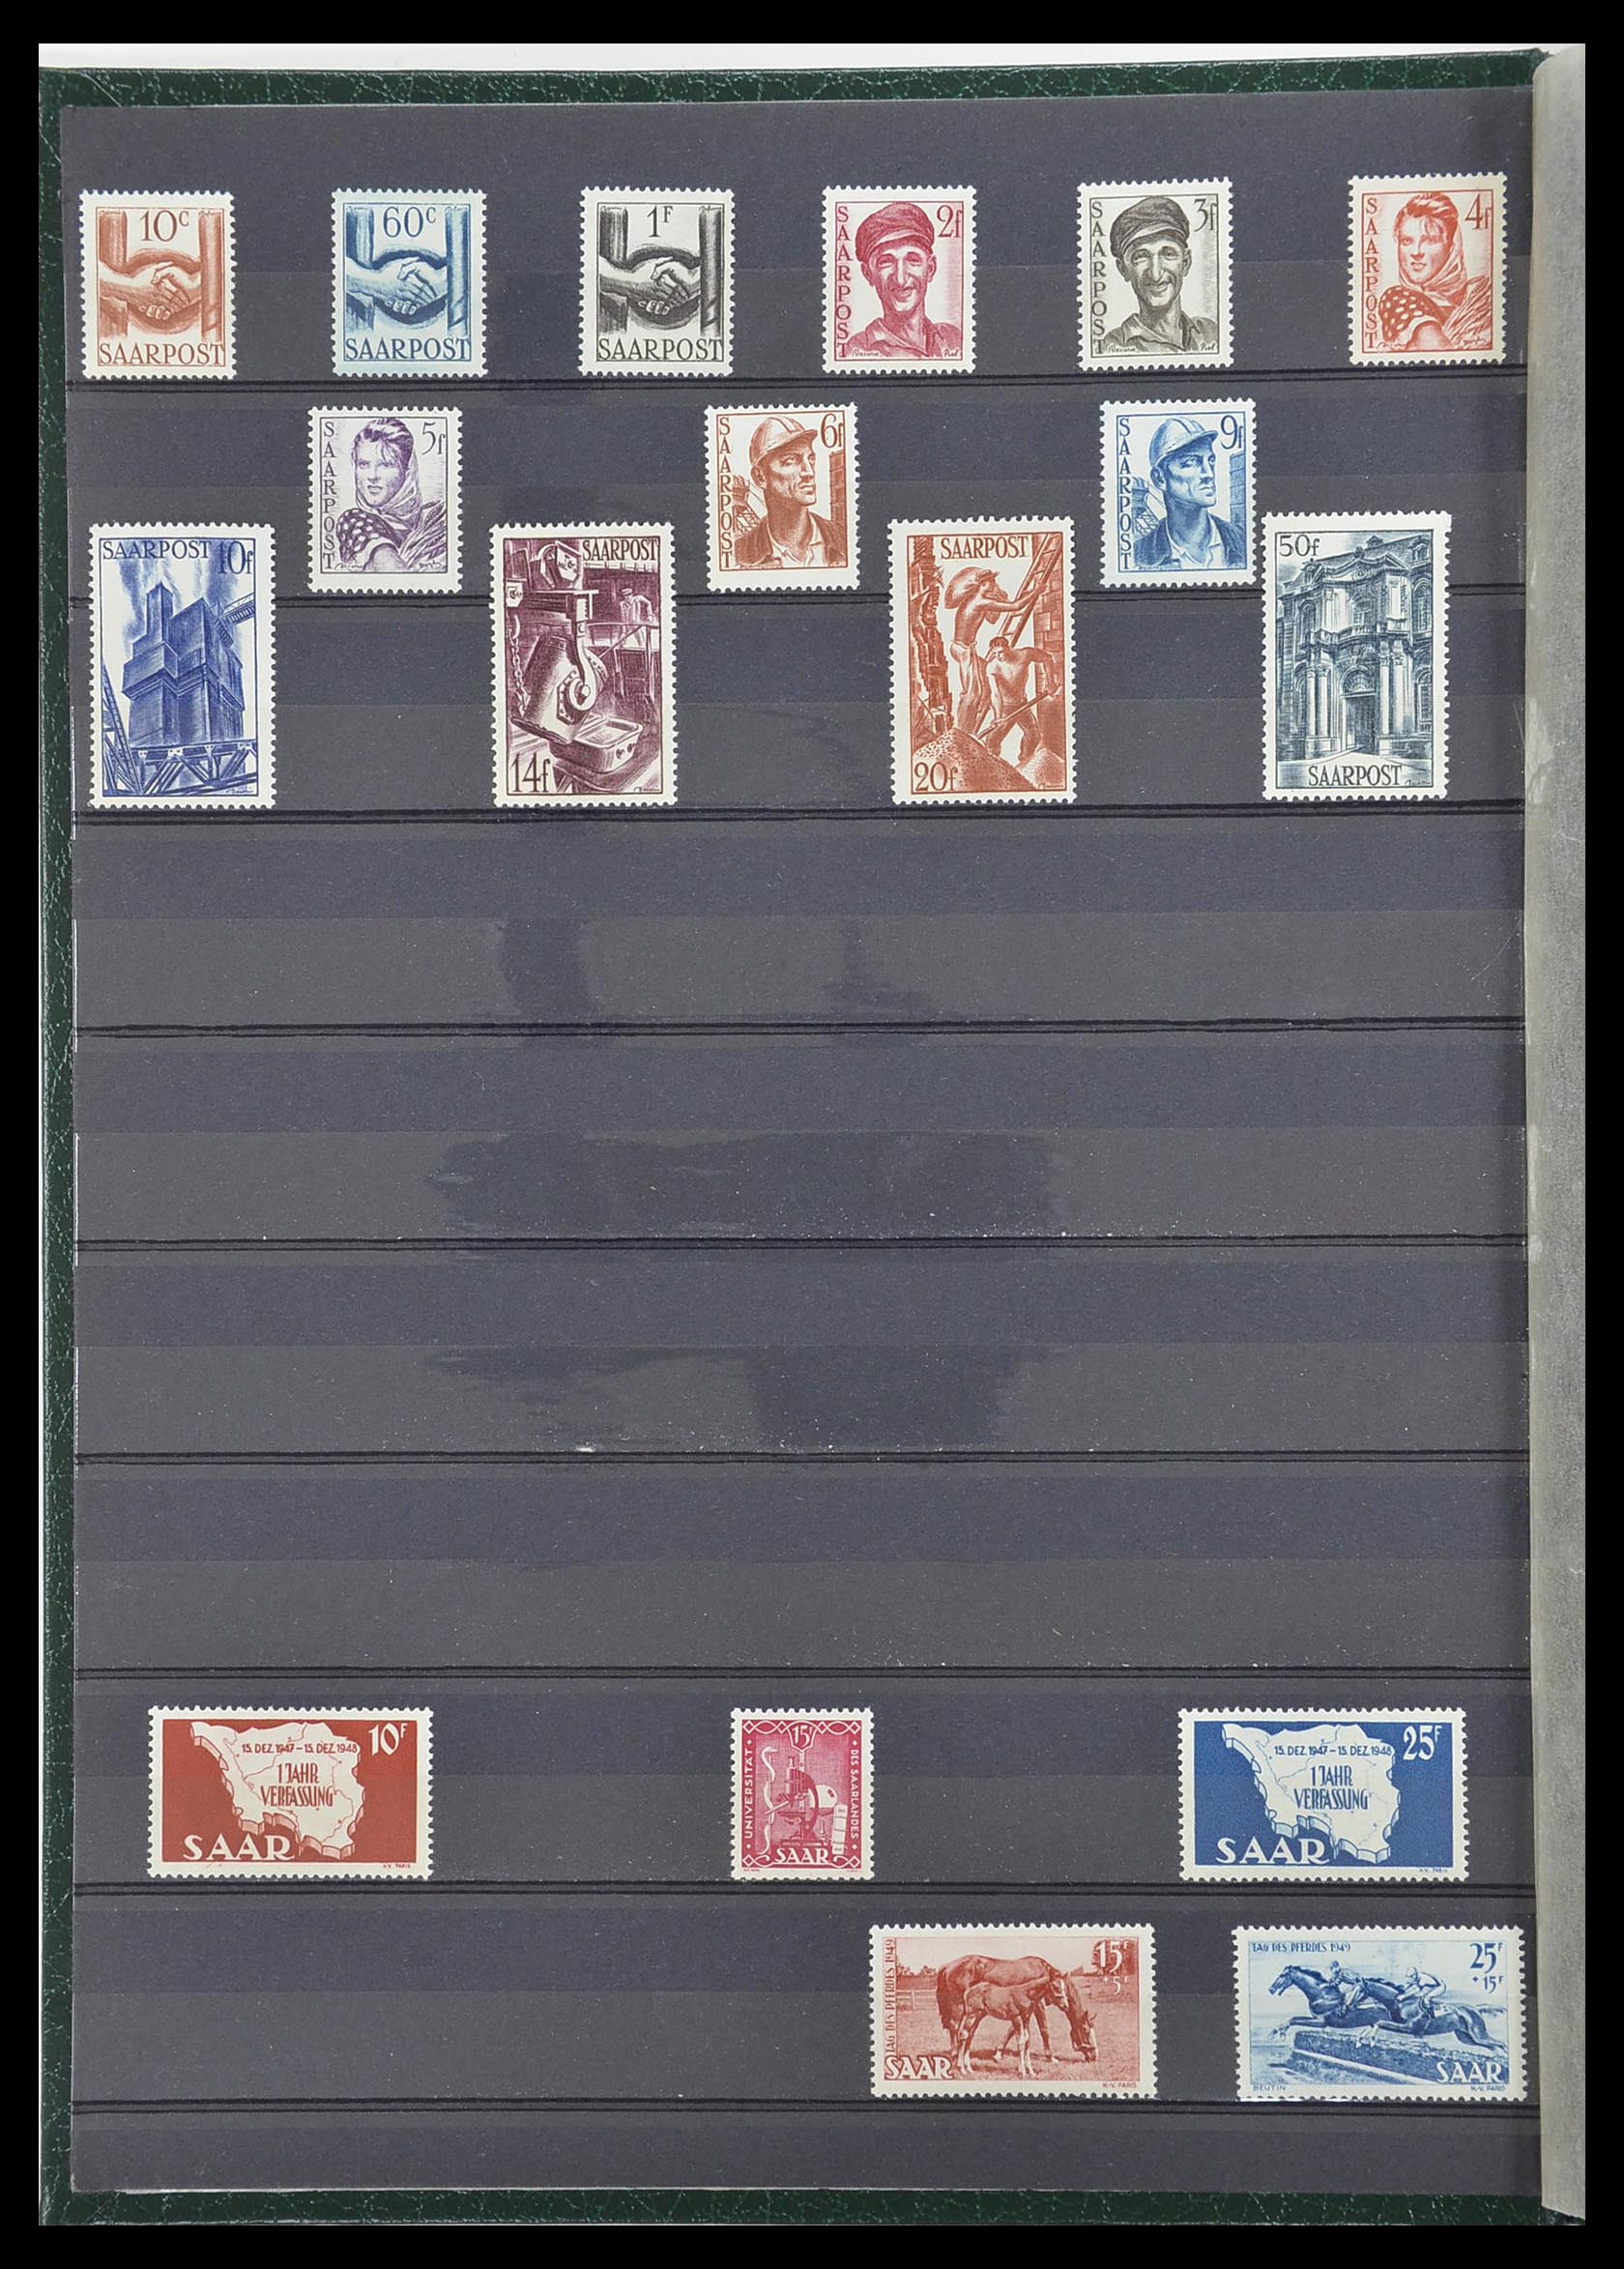 33553 088 - Stamp collection 33553 German territories and occupations 1939-1948.